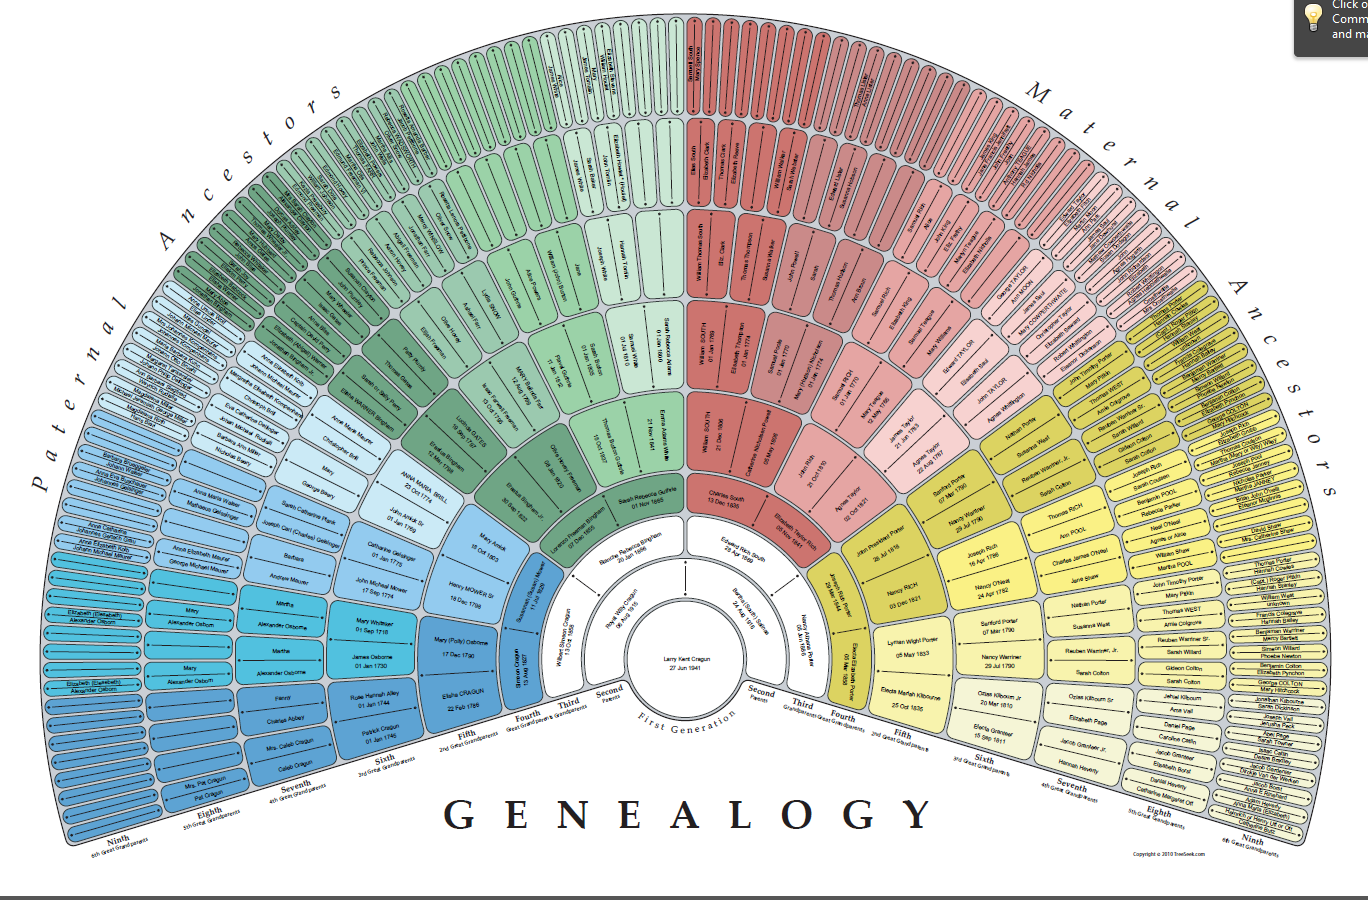 Larry Cragun Family And Genealogy Blog: Do You Have A Fan Chart Yet?